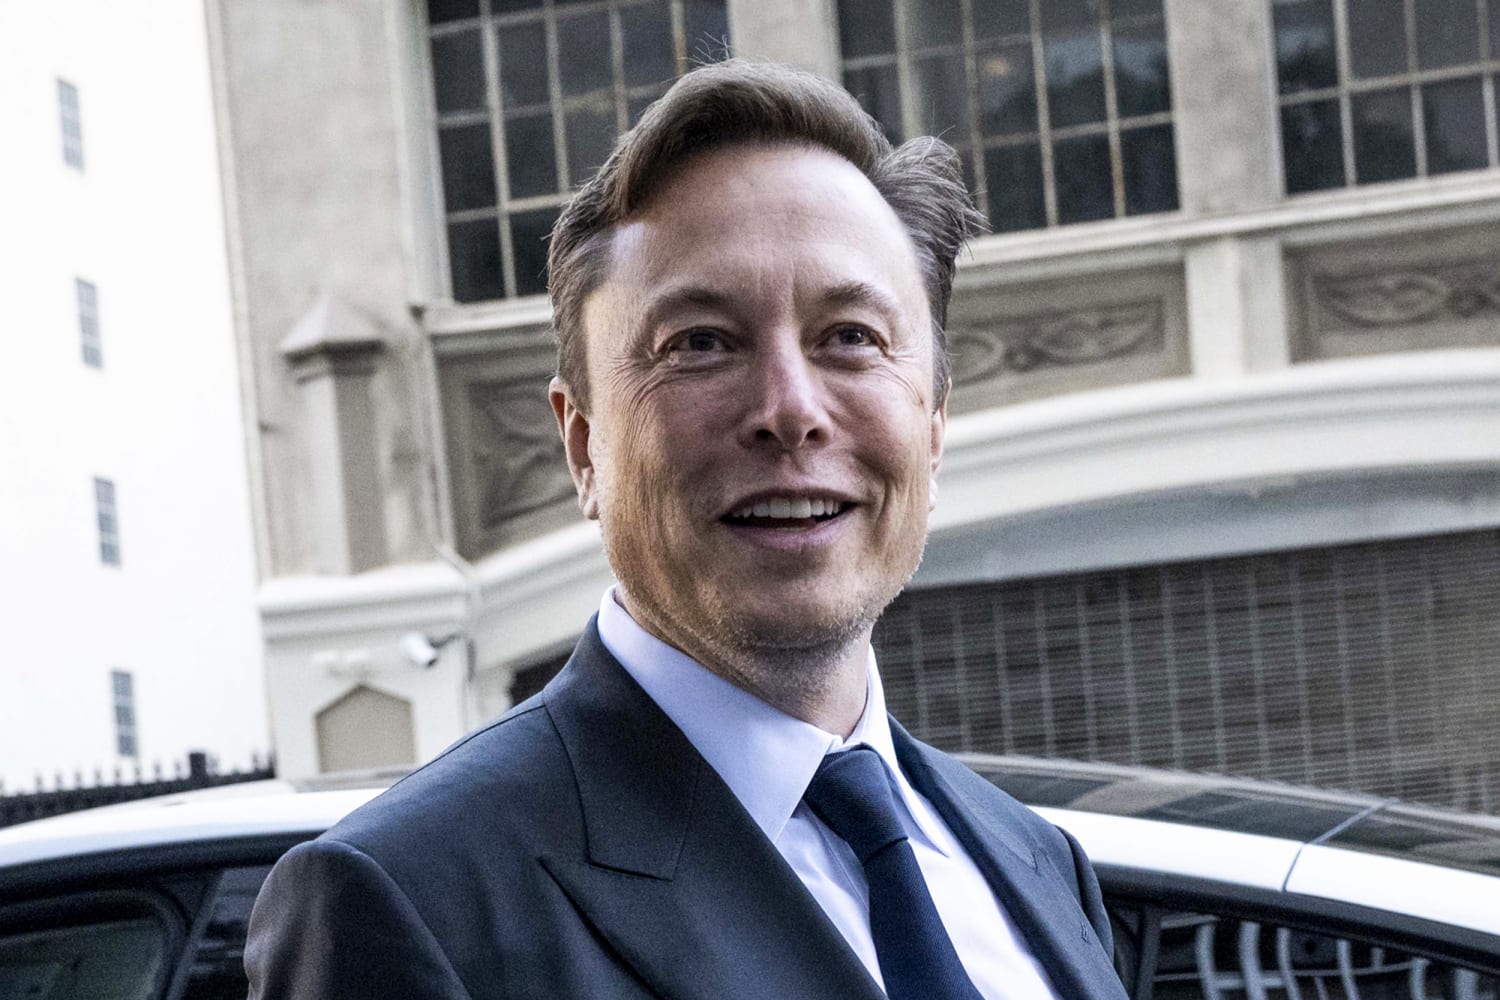 Elon Musk says he's hired a new CEO for Twitter and will reduce his own role